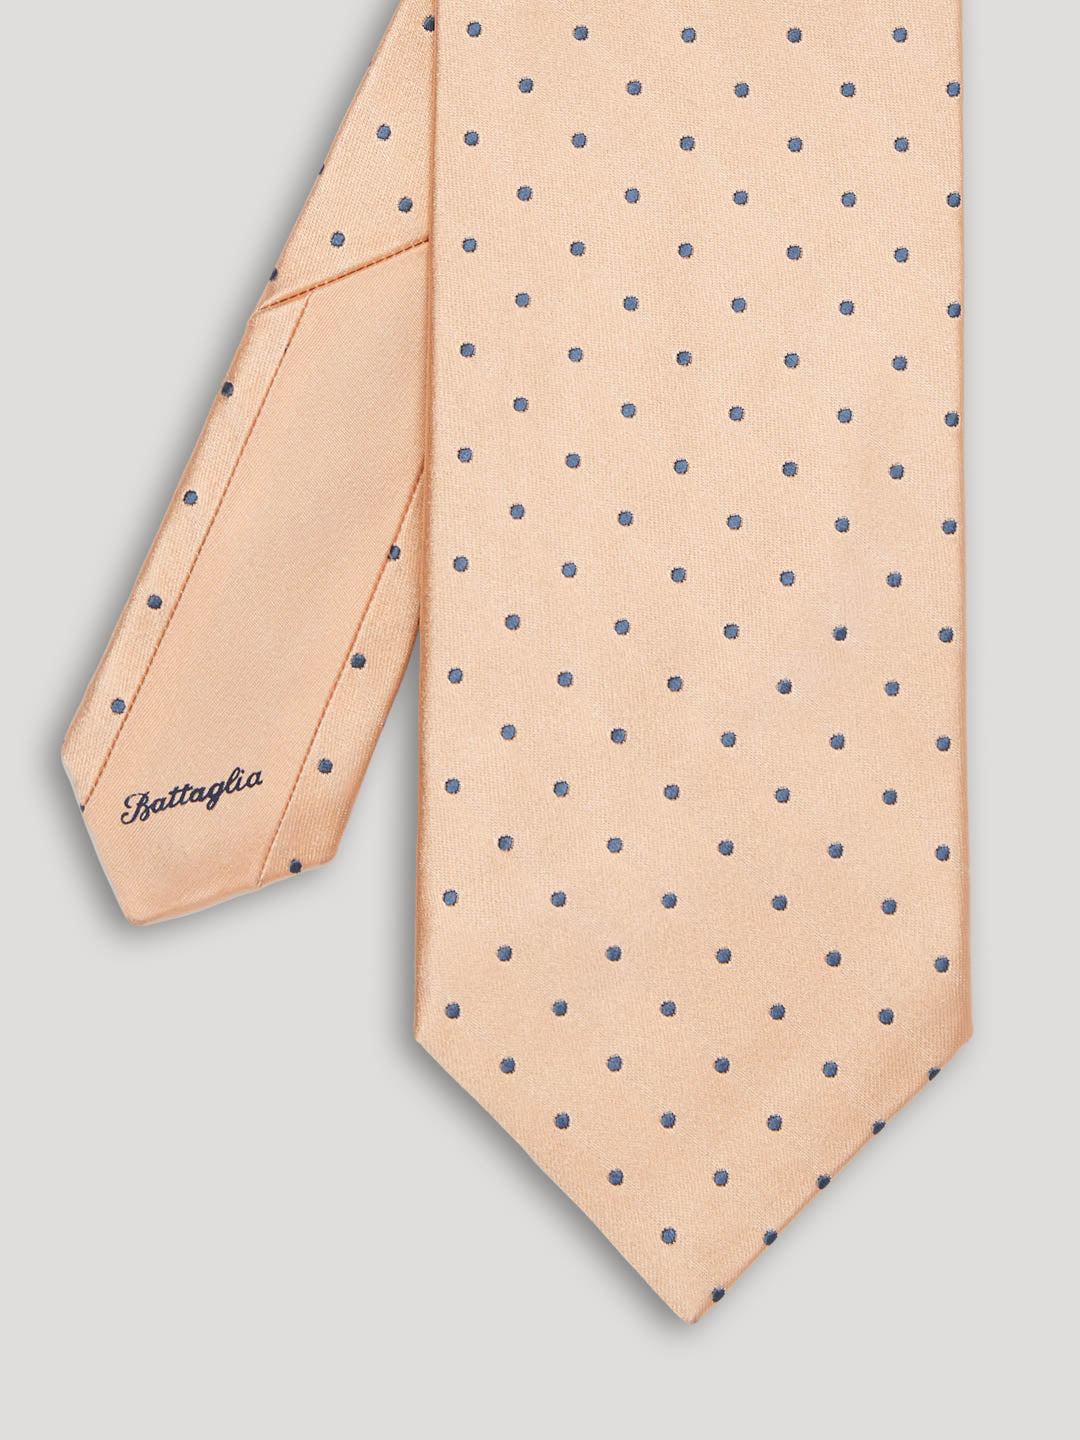 Pink tie with grey polkadots. 